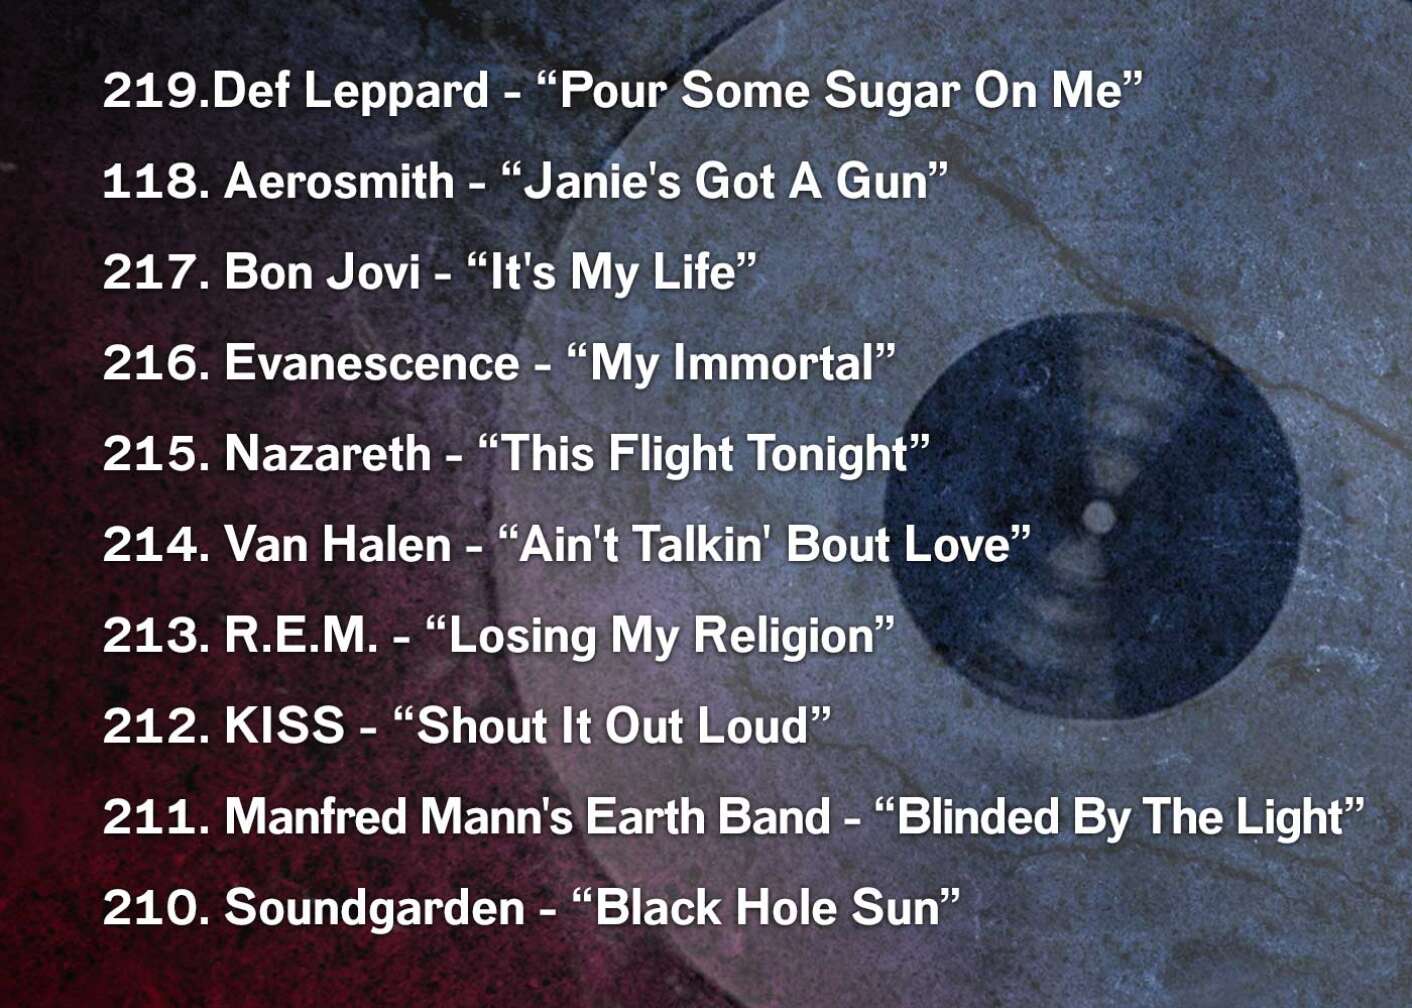 219.Def Leppard - “Pour Some Sugar On Me” 118. Aerosmith - “Janie's Got A Gun” 217. Bon Jovi - “It's My Life” 216. Evanescence - “My Immortal” 215. Nazareth - “This Flight Tonight” 214. Van Halen - “Ain't Talkin' Bout Love” 213. R.E.M. - “Losing My Religion” 212. KISS -	“Shout It Out Loud” 211. Manfred Mann's Earth Band - “Blinded By The Light” 210. Soundgarden - “Black Hole Sun”